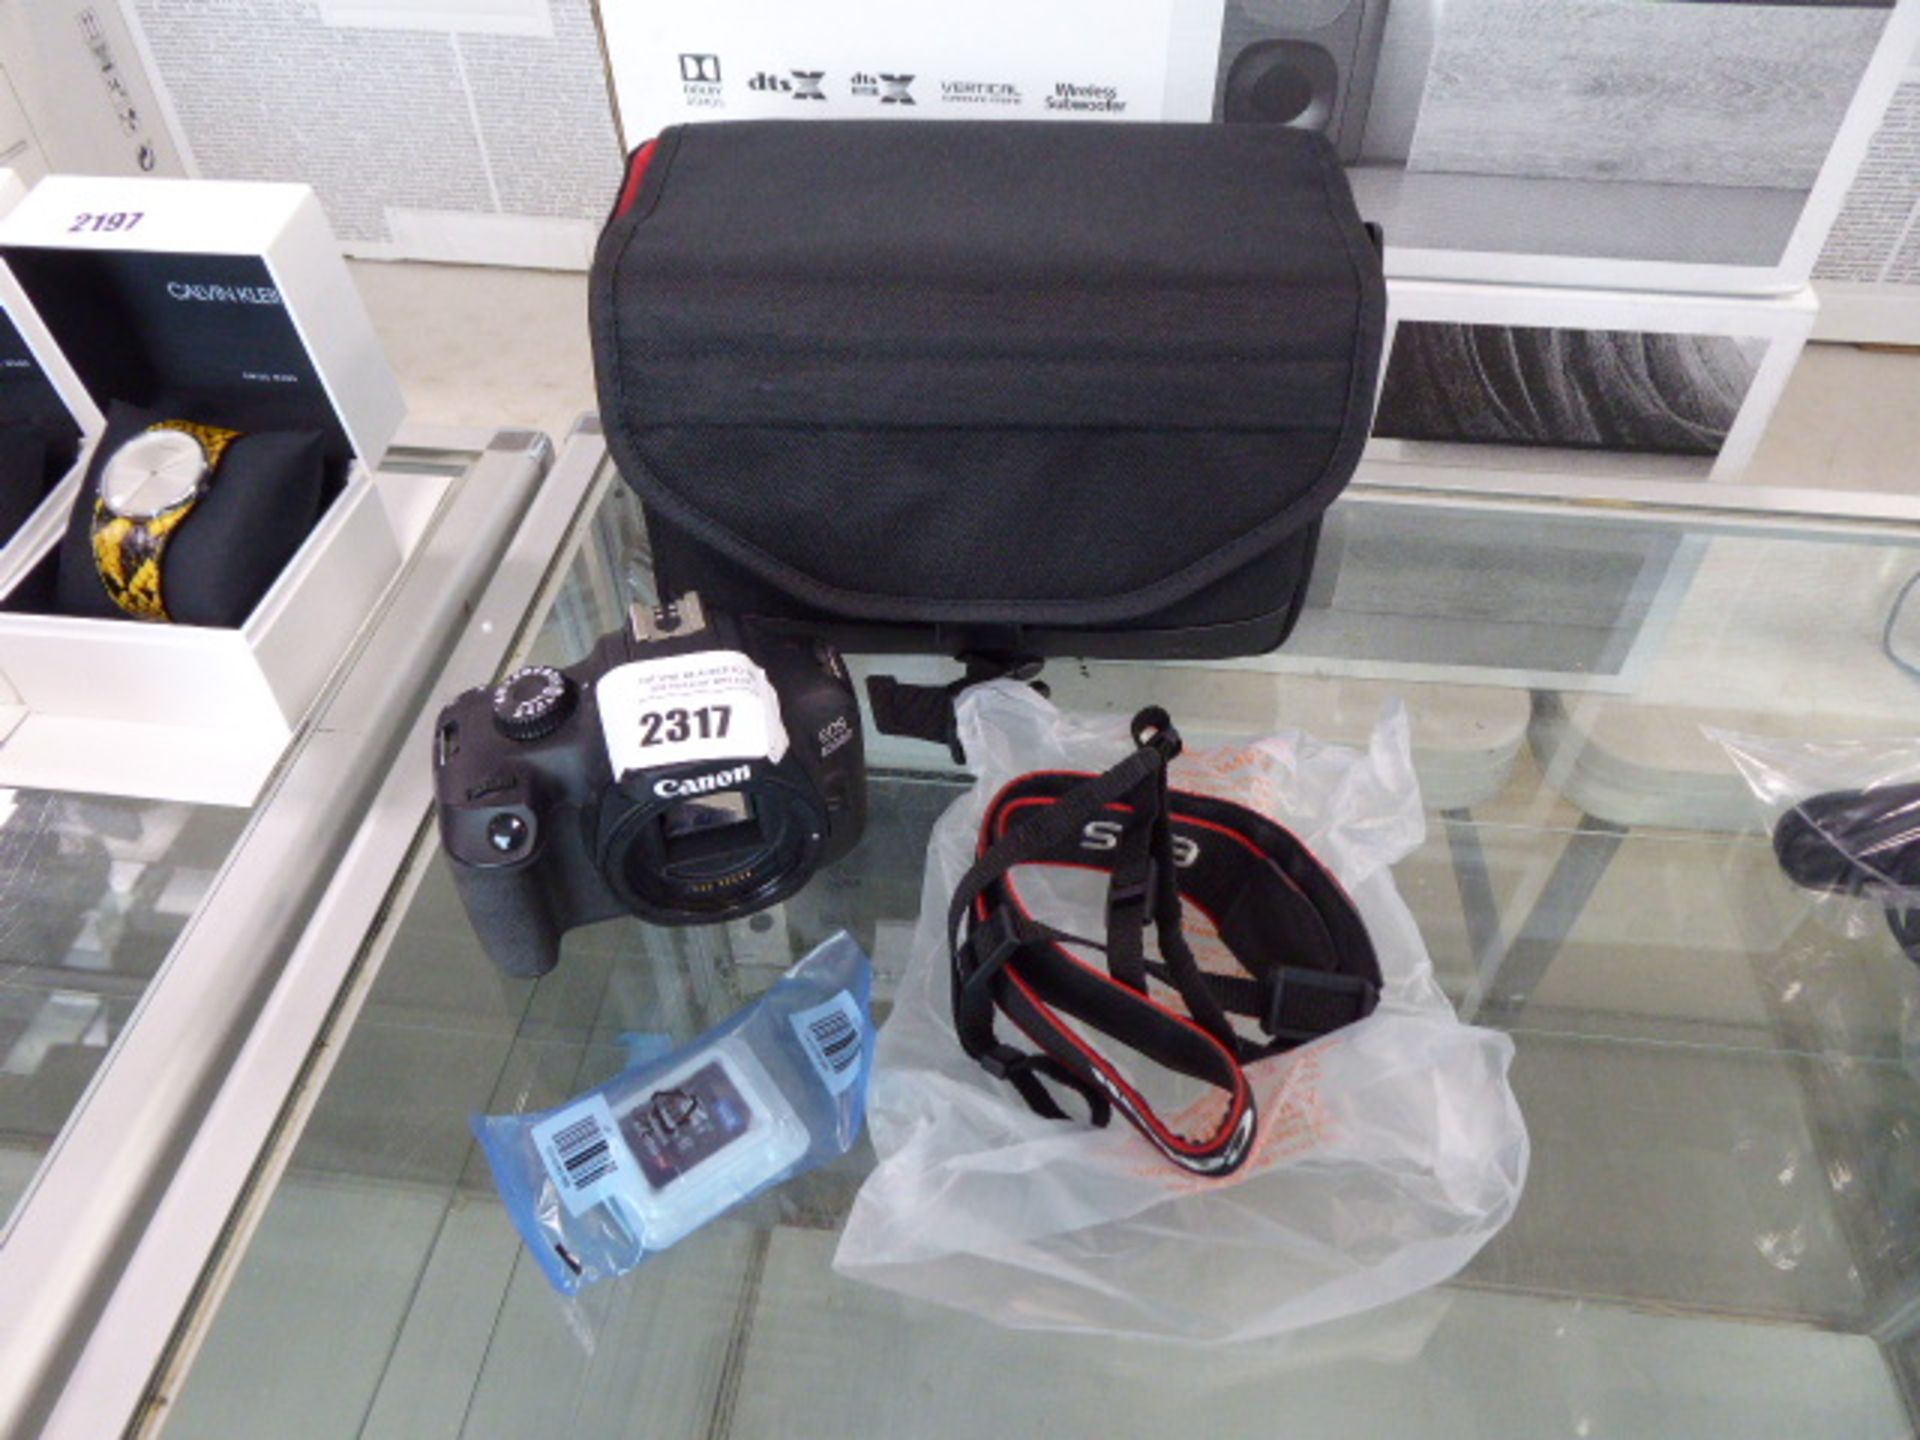 A Canon EOS4000 camera, with 16gb memory card, carry case and strap